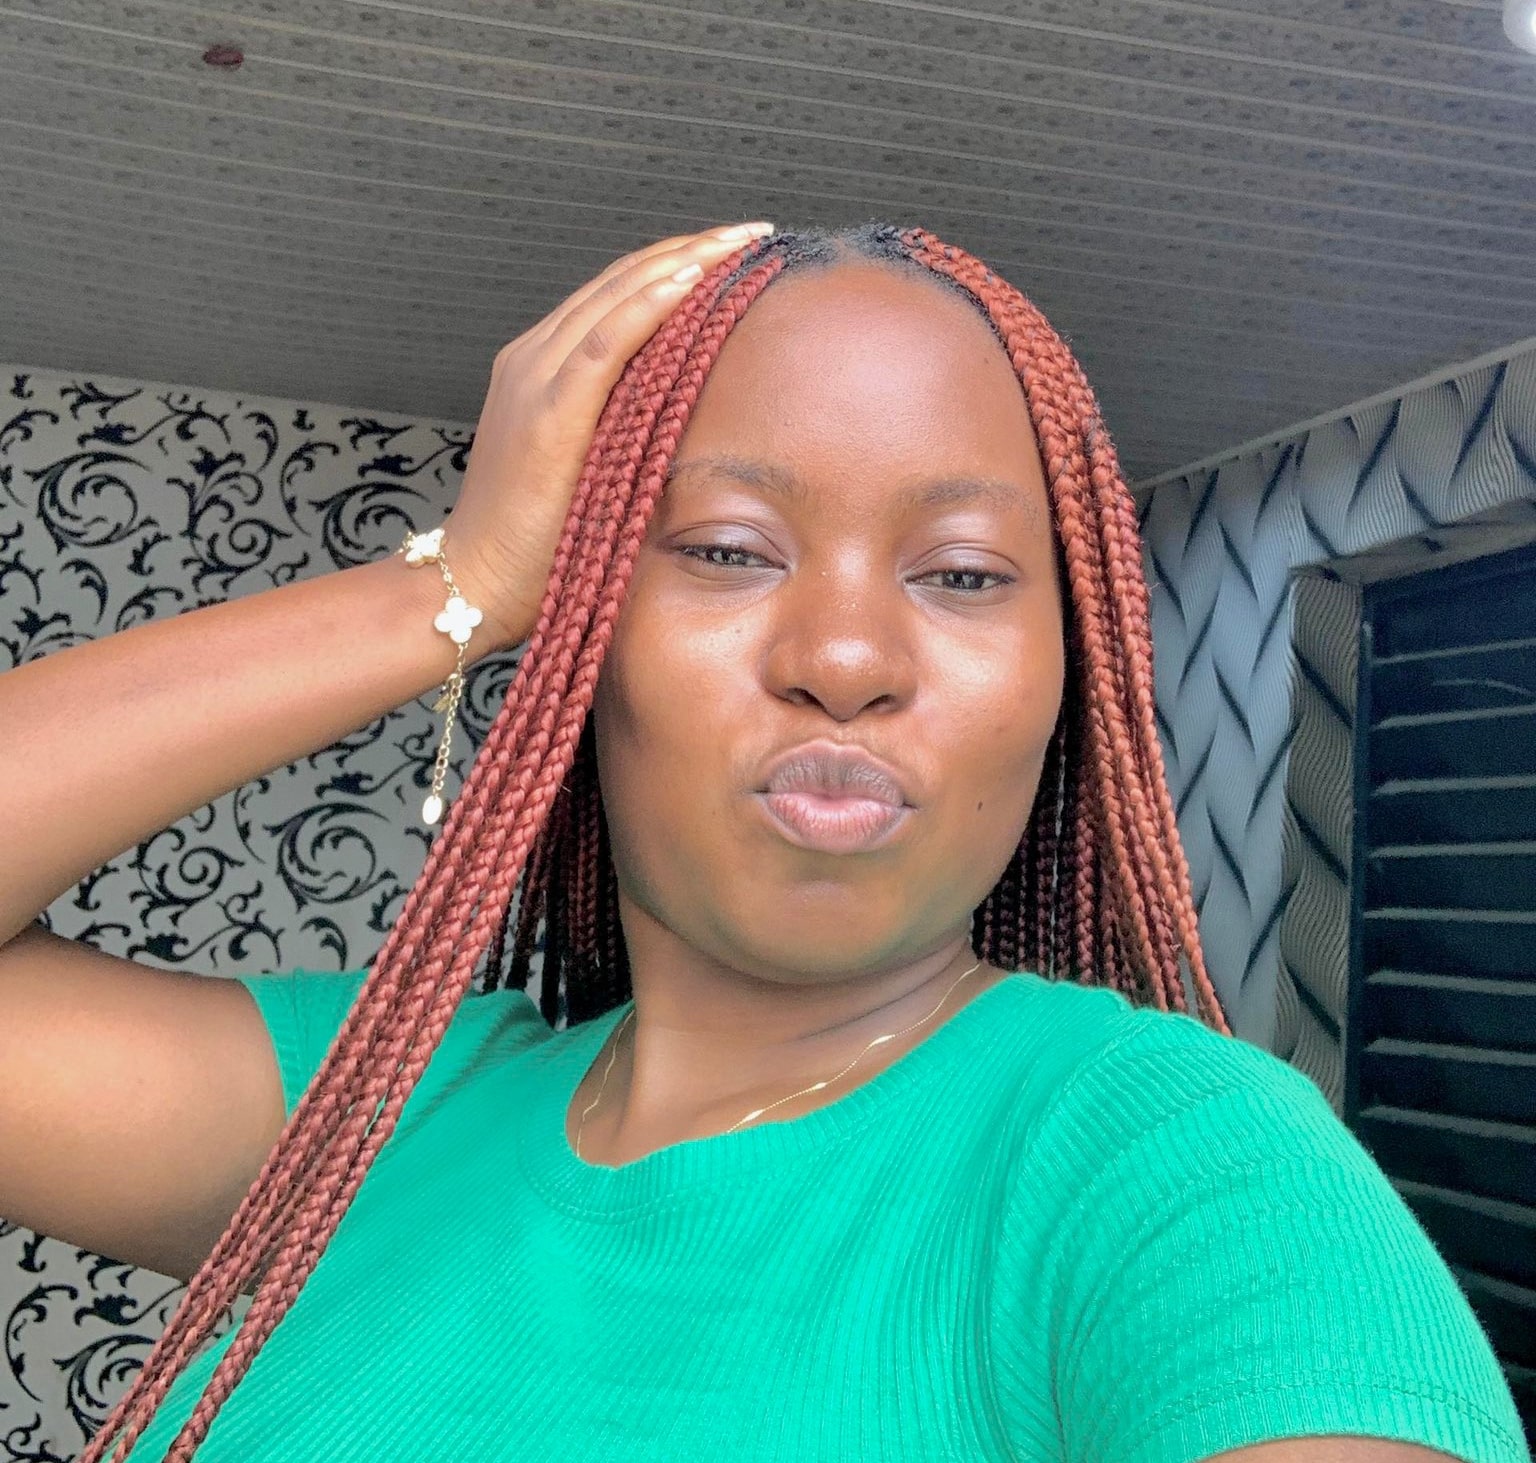 "I had a dream, Ivory Coast won" - Internet reacts as Nigerian lady predicts 1:0 defeat for Super Eagles in AFCON final